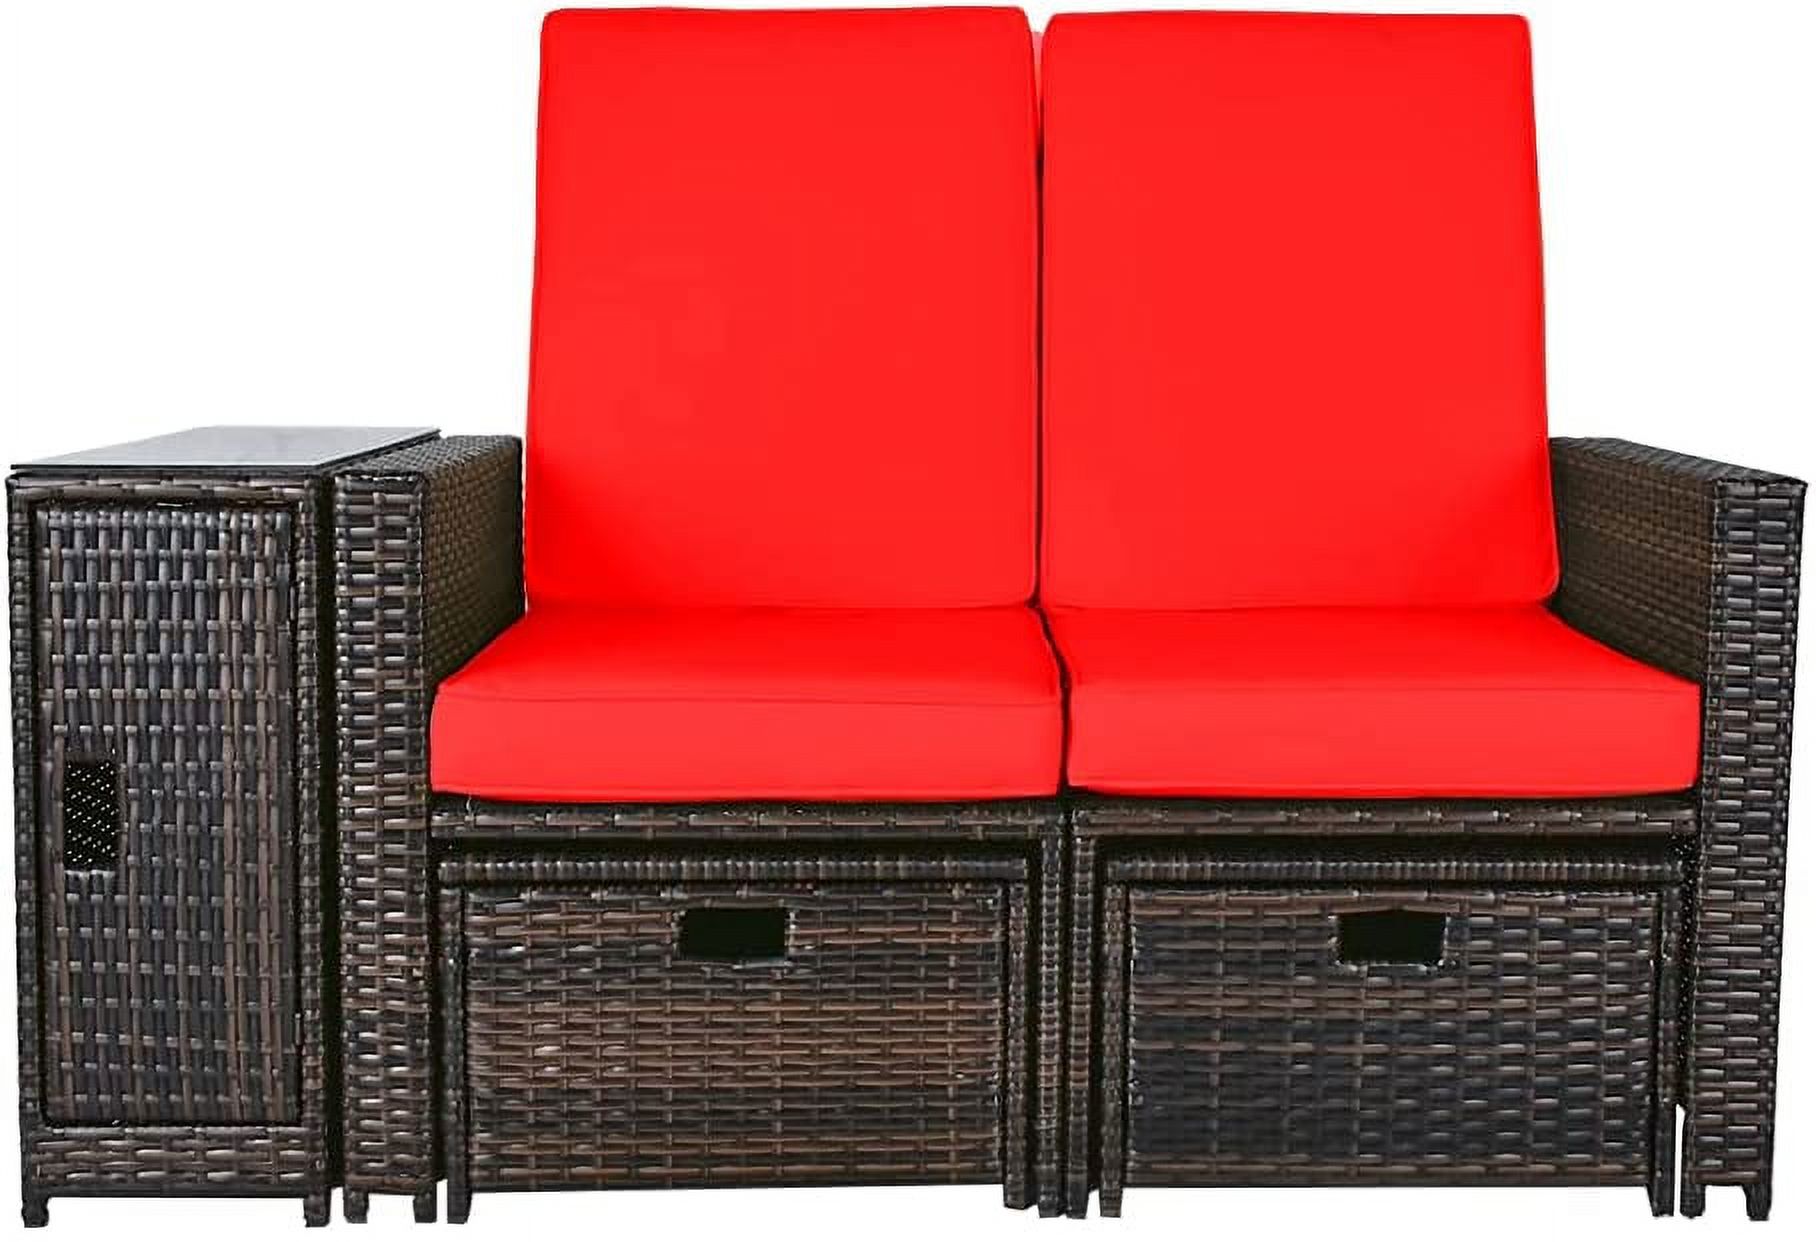 LVUYOYO 5pcs Patio Wicker Loveseat - Outdoor Rattan Sofa Set with Cushion - Adjustable Lounge Chair with Ottoman Footrest, Wicker Furniture for Garden, Patio, Balcony, Beach, Coffee Bar, Deck - image 1 of 7